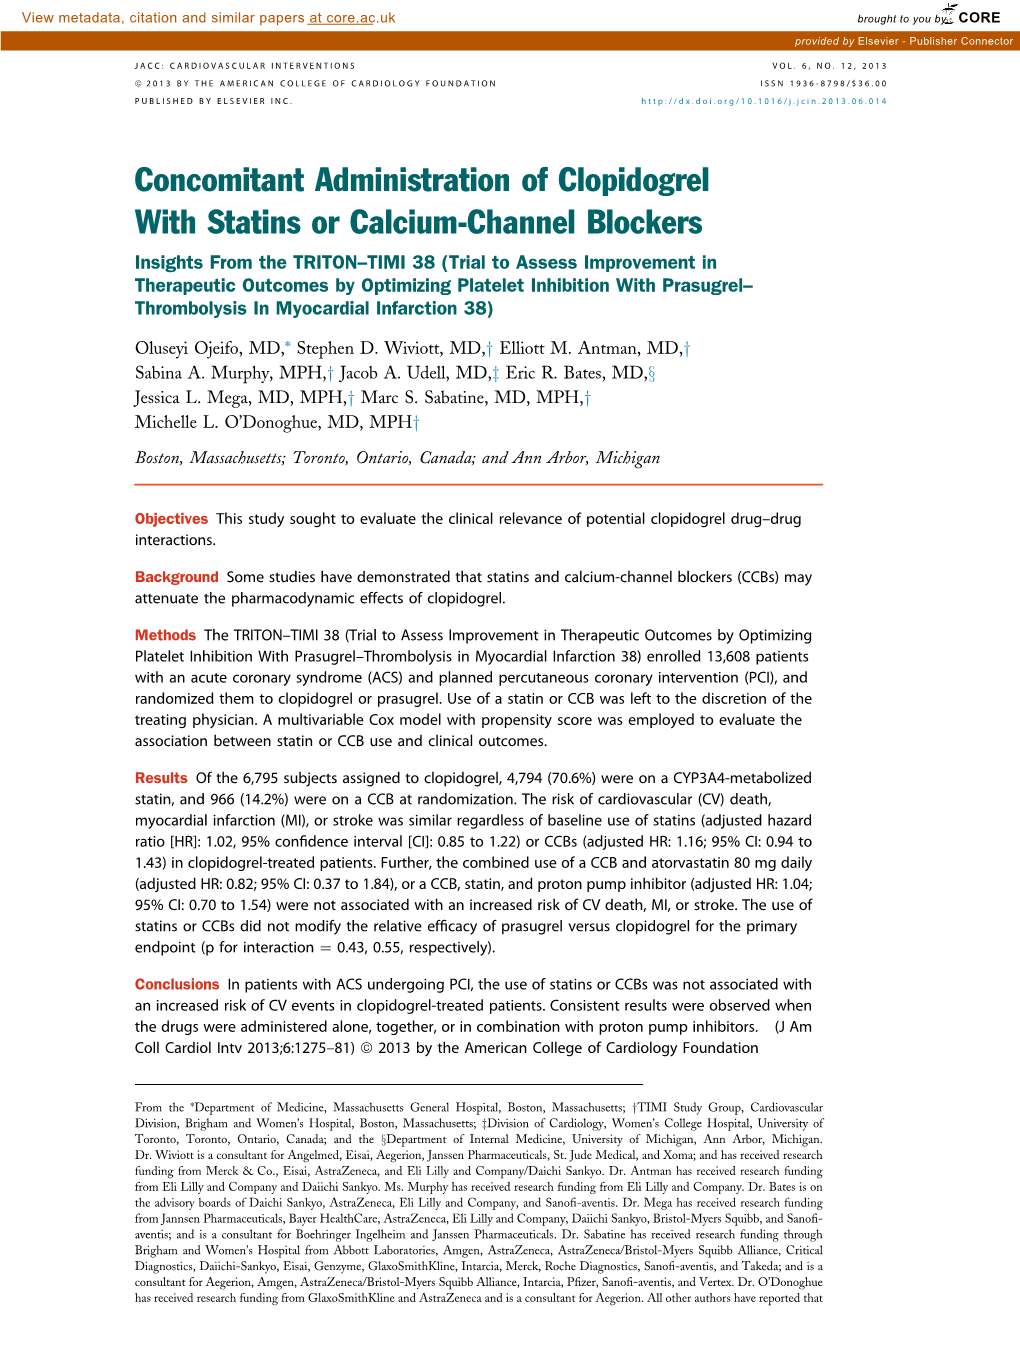 Concomitant Administration of Clopidogrel with Statins Or Calcium